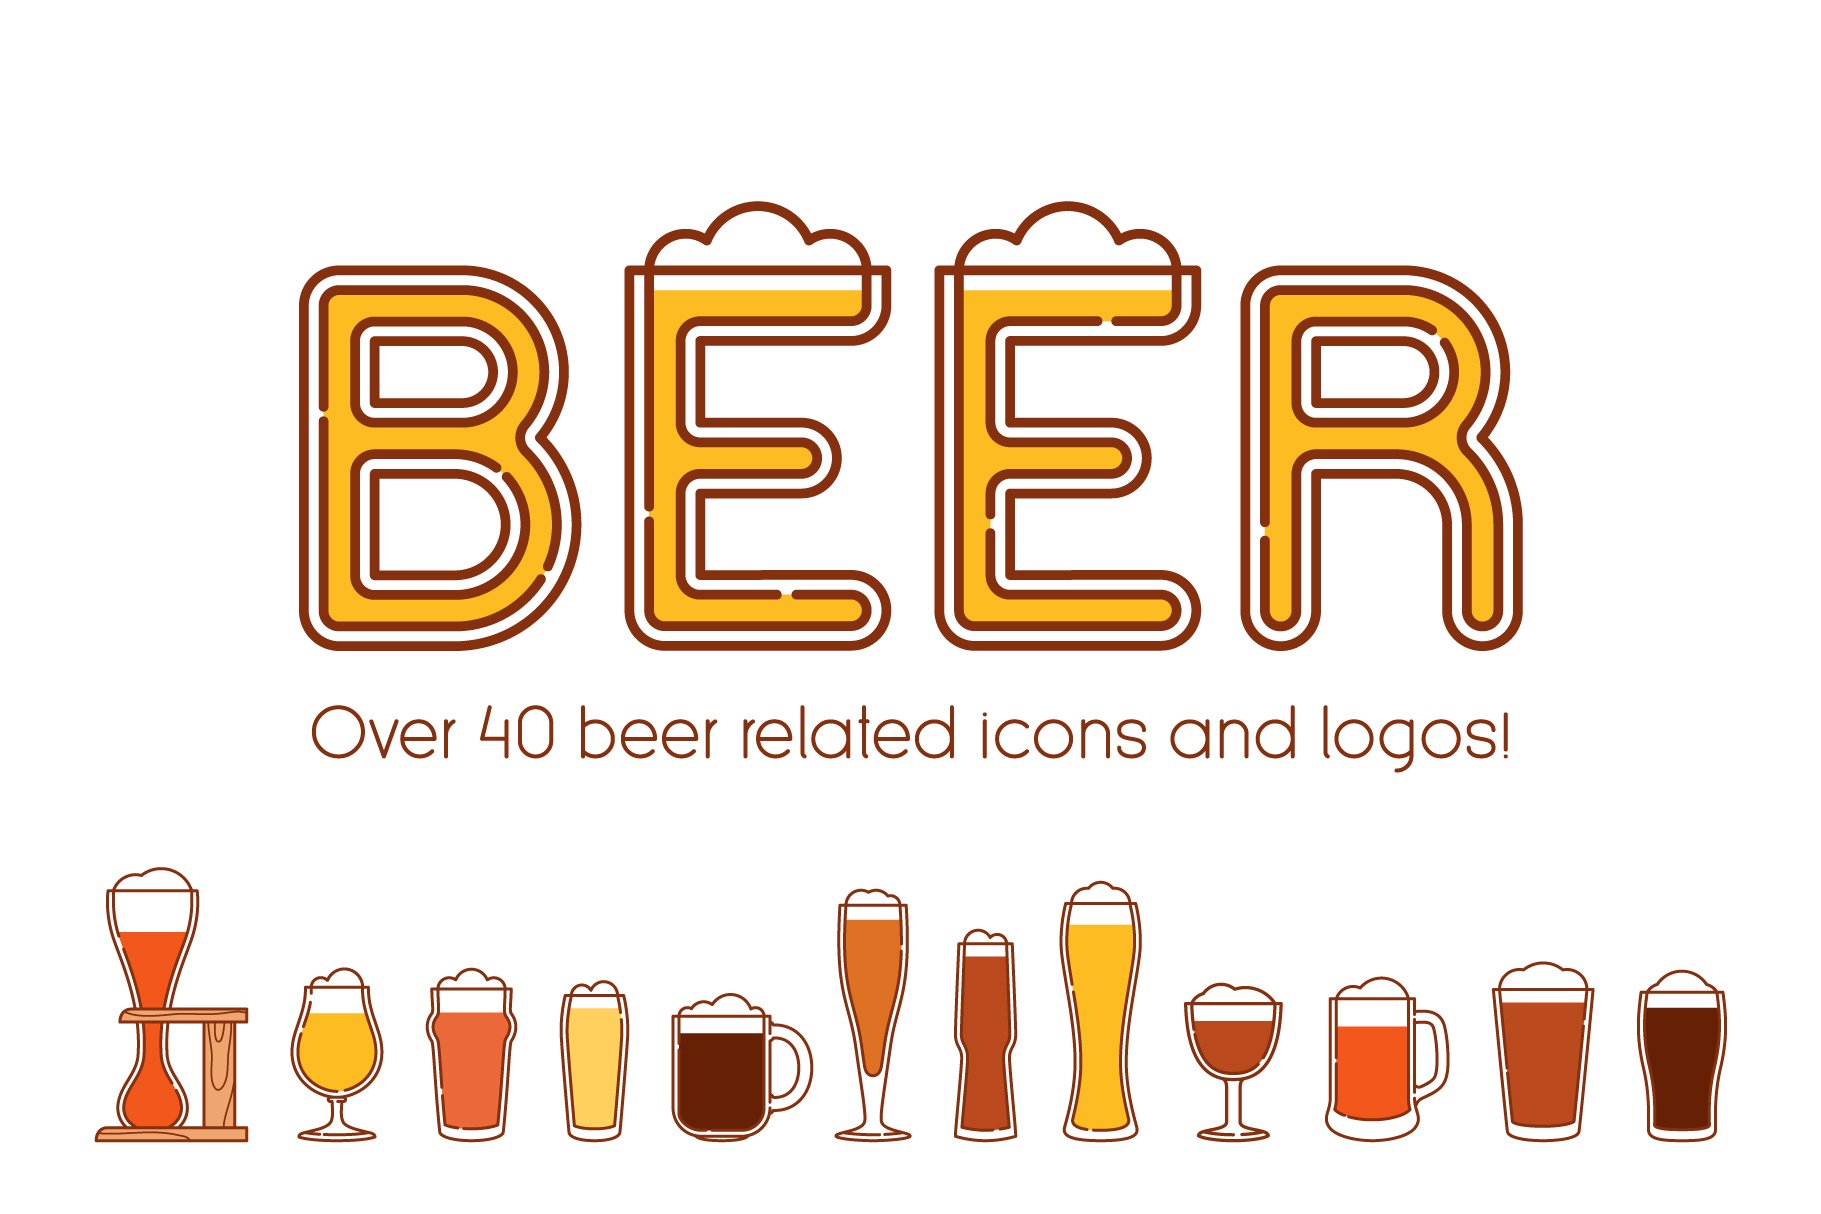 Over 40 beer related icons and logos.